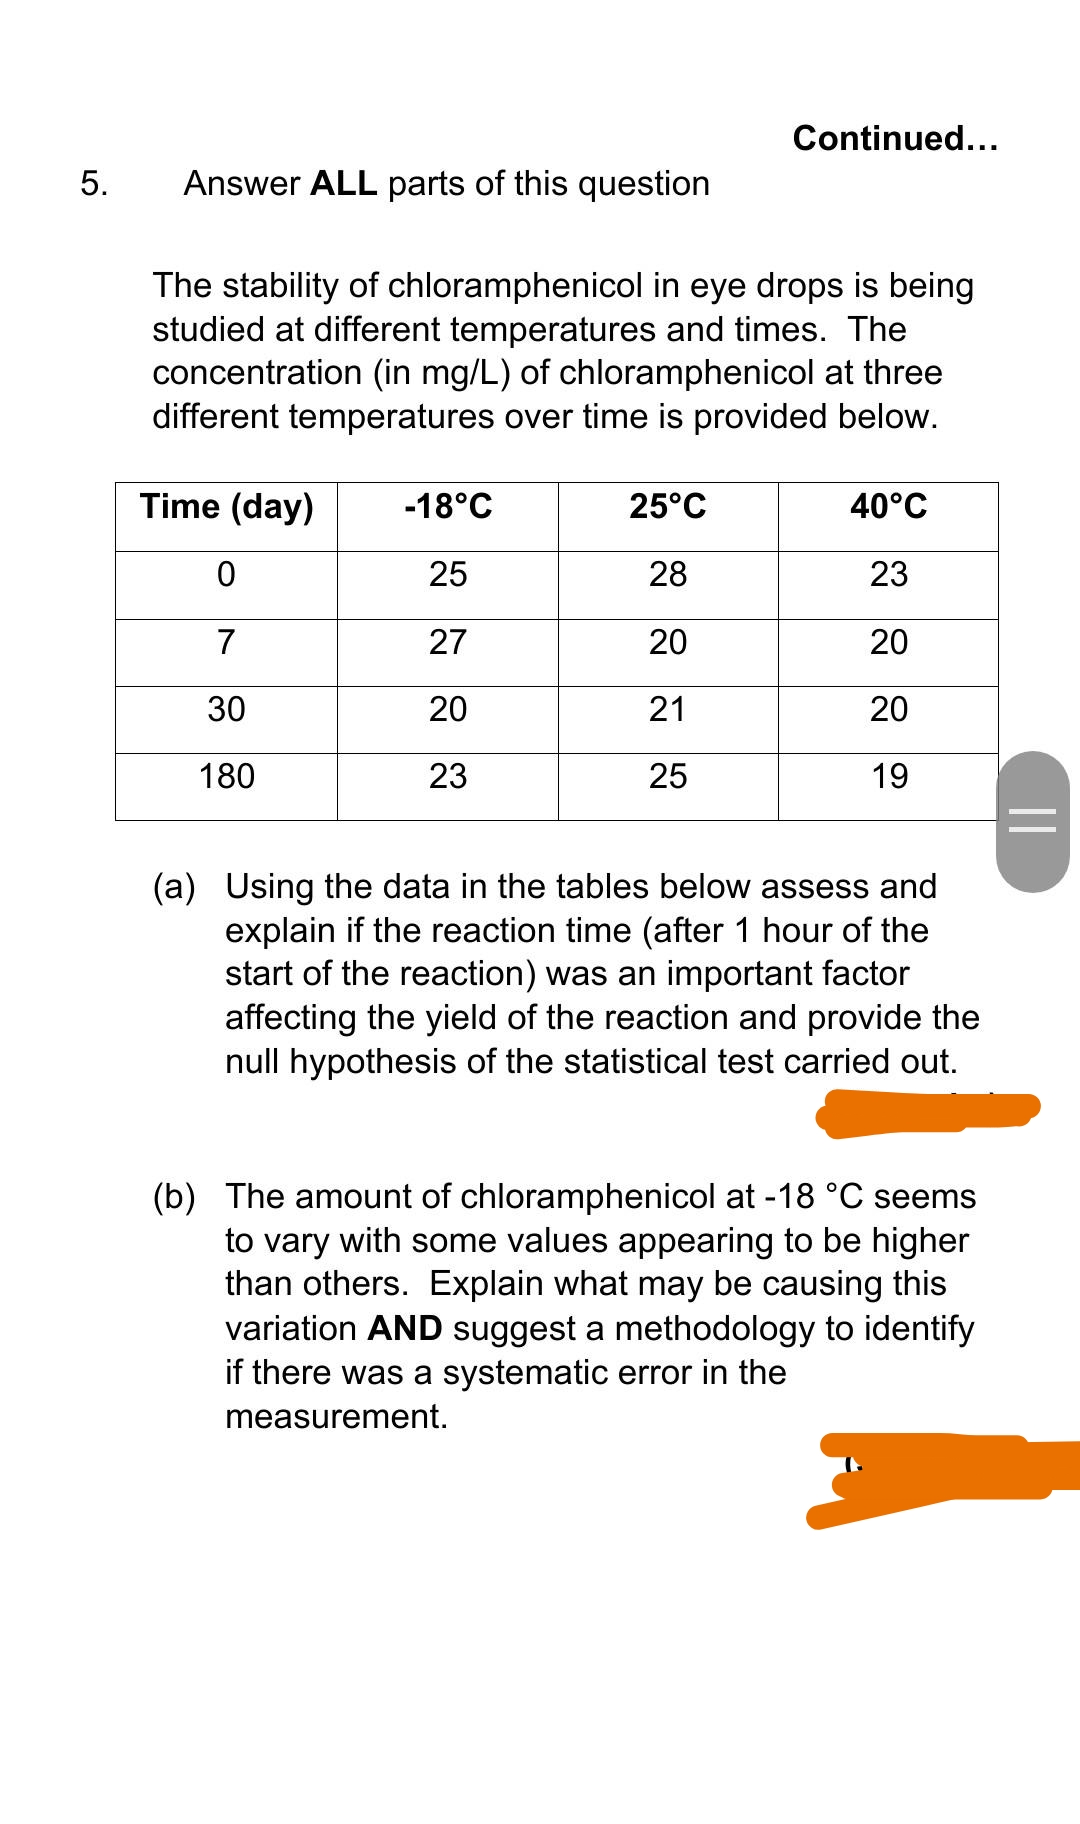 Continued...
5.
Answer ALL parts of this question
The stability of chloramphenicol in eye drops is being
studied at different temperatures and times. The
concentration (in mg/L) of chloramphenicol at three
different temperatures over time is provided below.
Time (day)
-18°C
25°C
40°C
25
28
23
7
27
20
20
30
20
21
20
180
23
25
19
(a) Using the data in the tables below assess and
explain if the reaction time (after 1 hour of the
start of the reaction) was an important factor
affecting the yield of the reaction and provide the
null hypothesis of the statistical test carried out.
(b) The amount of chloramphenicol at -18 °C seems
to vary with some values appearing to be higher
than others. Explain what may be causing this
variation AND suggest a methodology to identify
if there was a systematic error in the
measurement.
||
